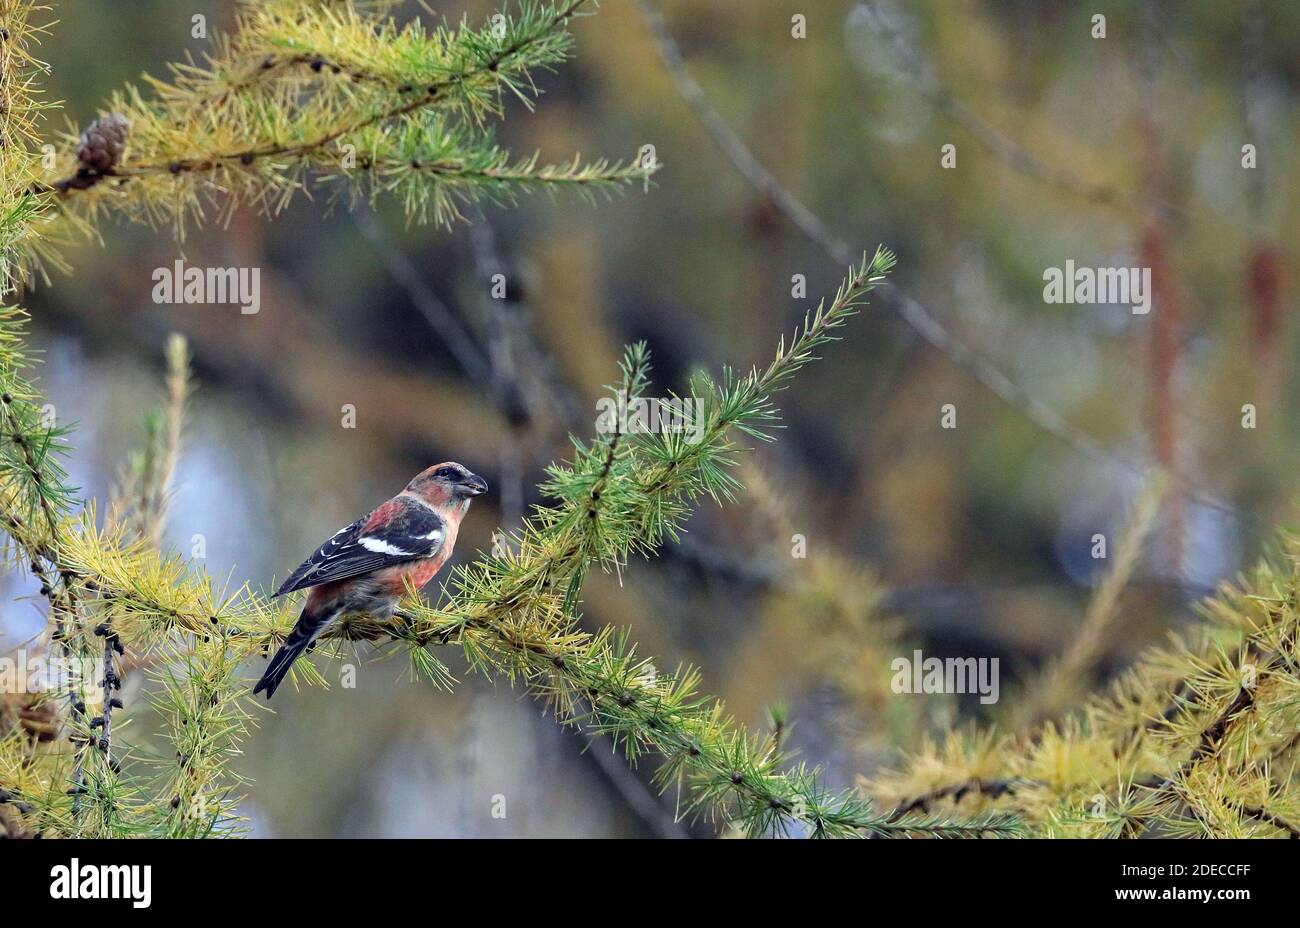 Two-barred crossbill, White-winged crossbill male in Larch tree Stock Photo